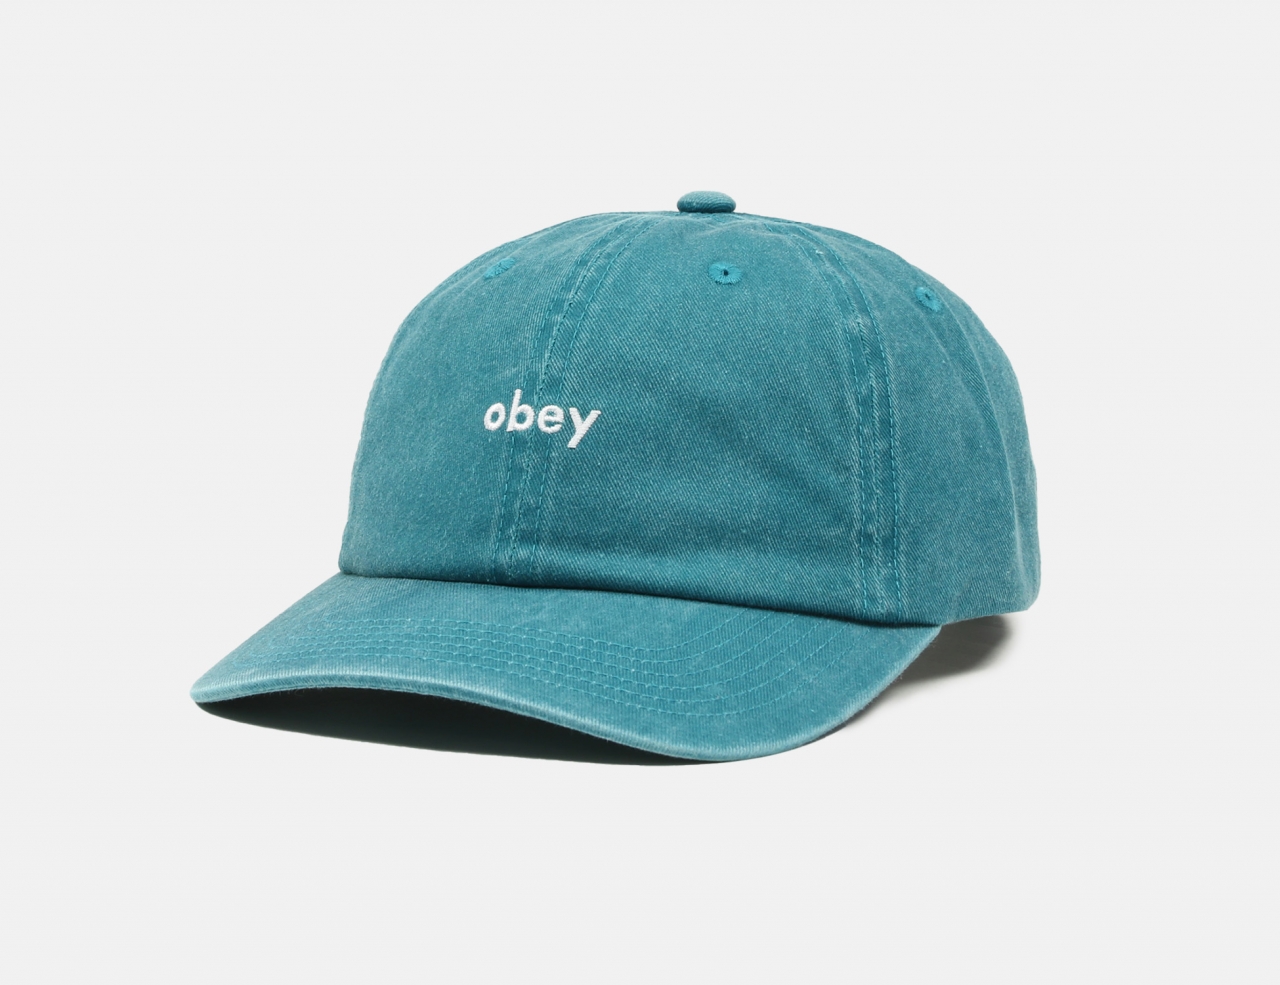 Obey Pigment Lowercase 6 Panel Cap - Pigment Teal